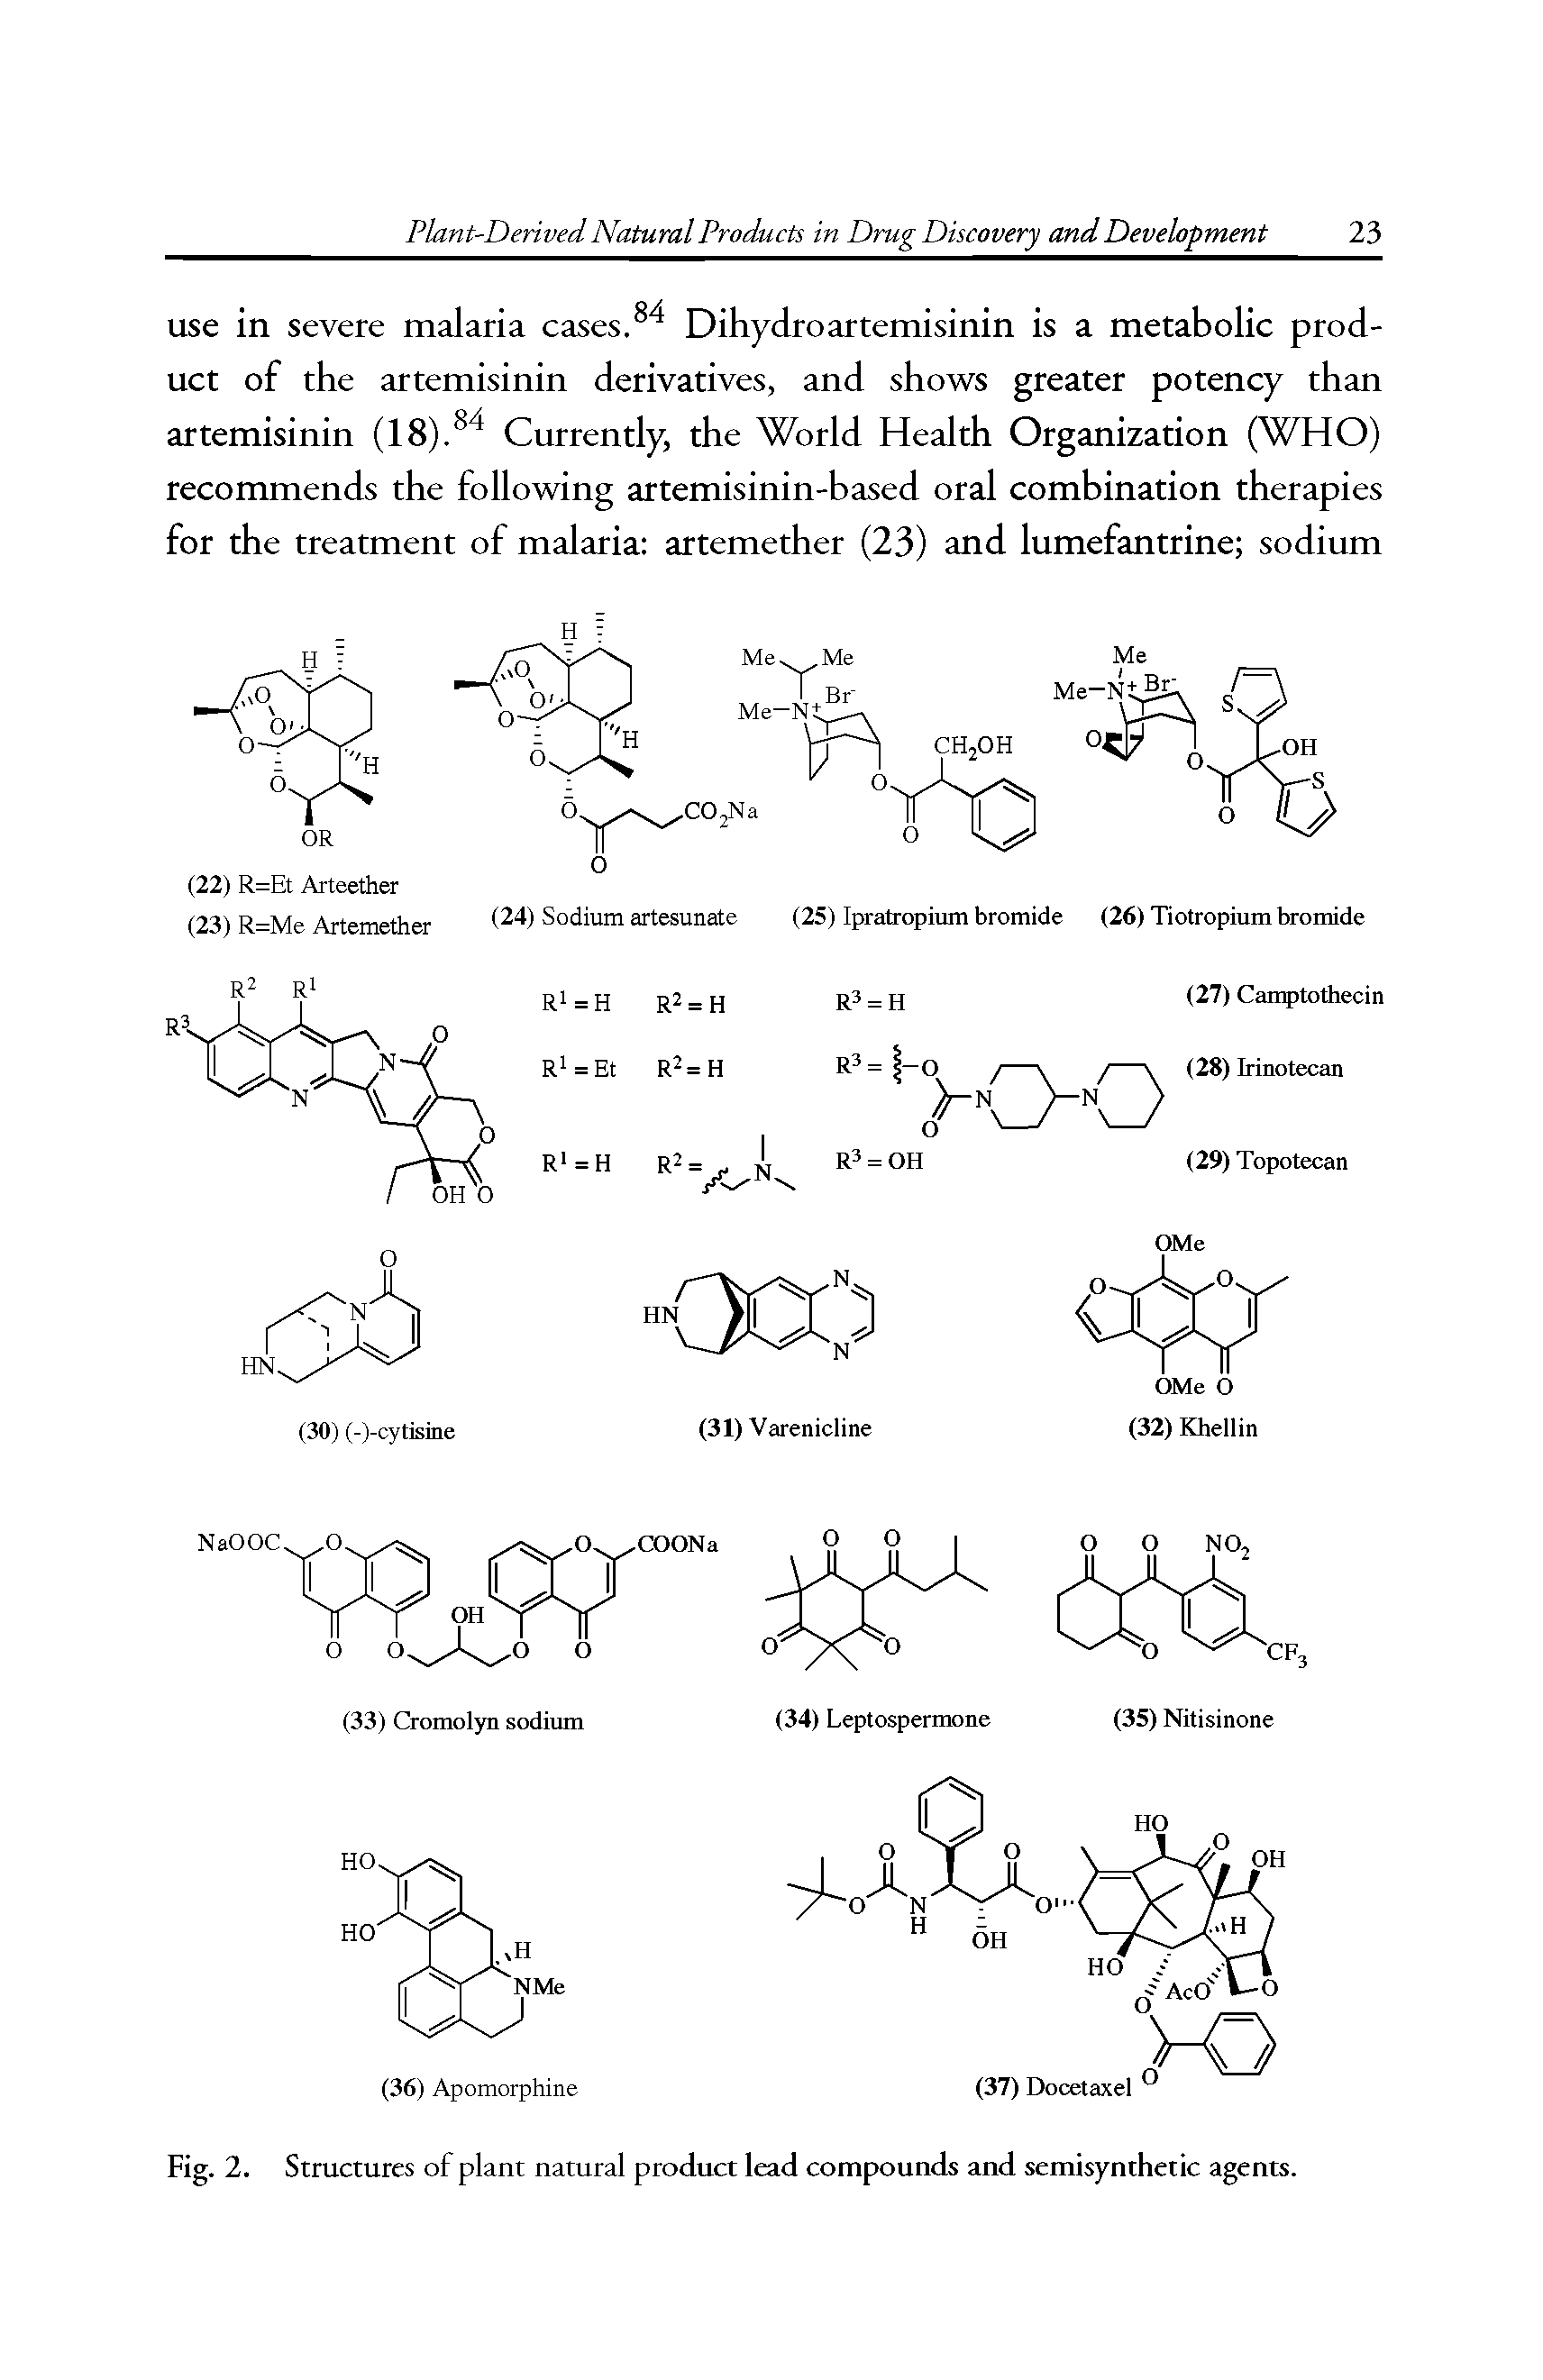 Fig. 2. Structures of plant natural product lead compounds and semisynthetic agents.